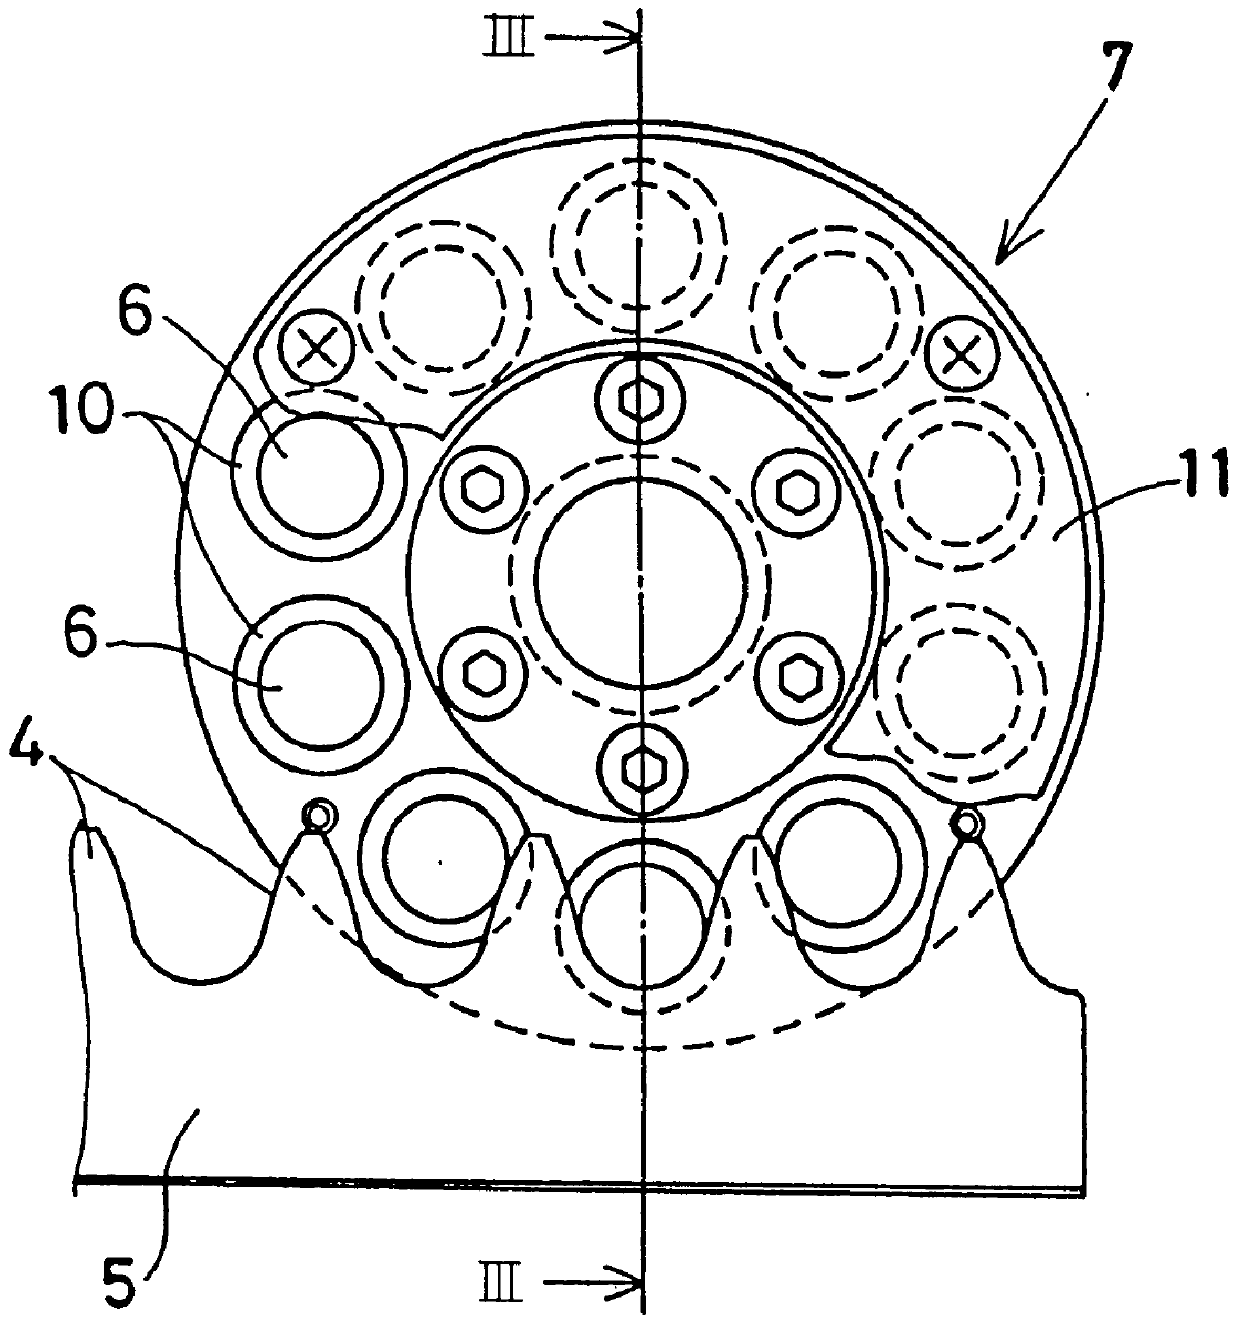 Transmission device for converting a torque between rotary movement and linear movement